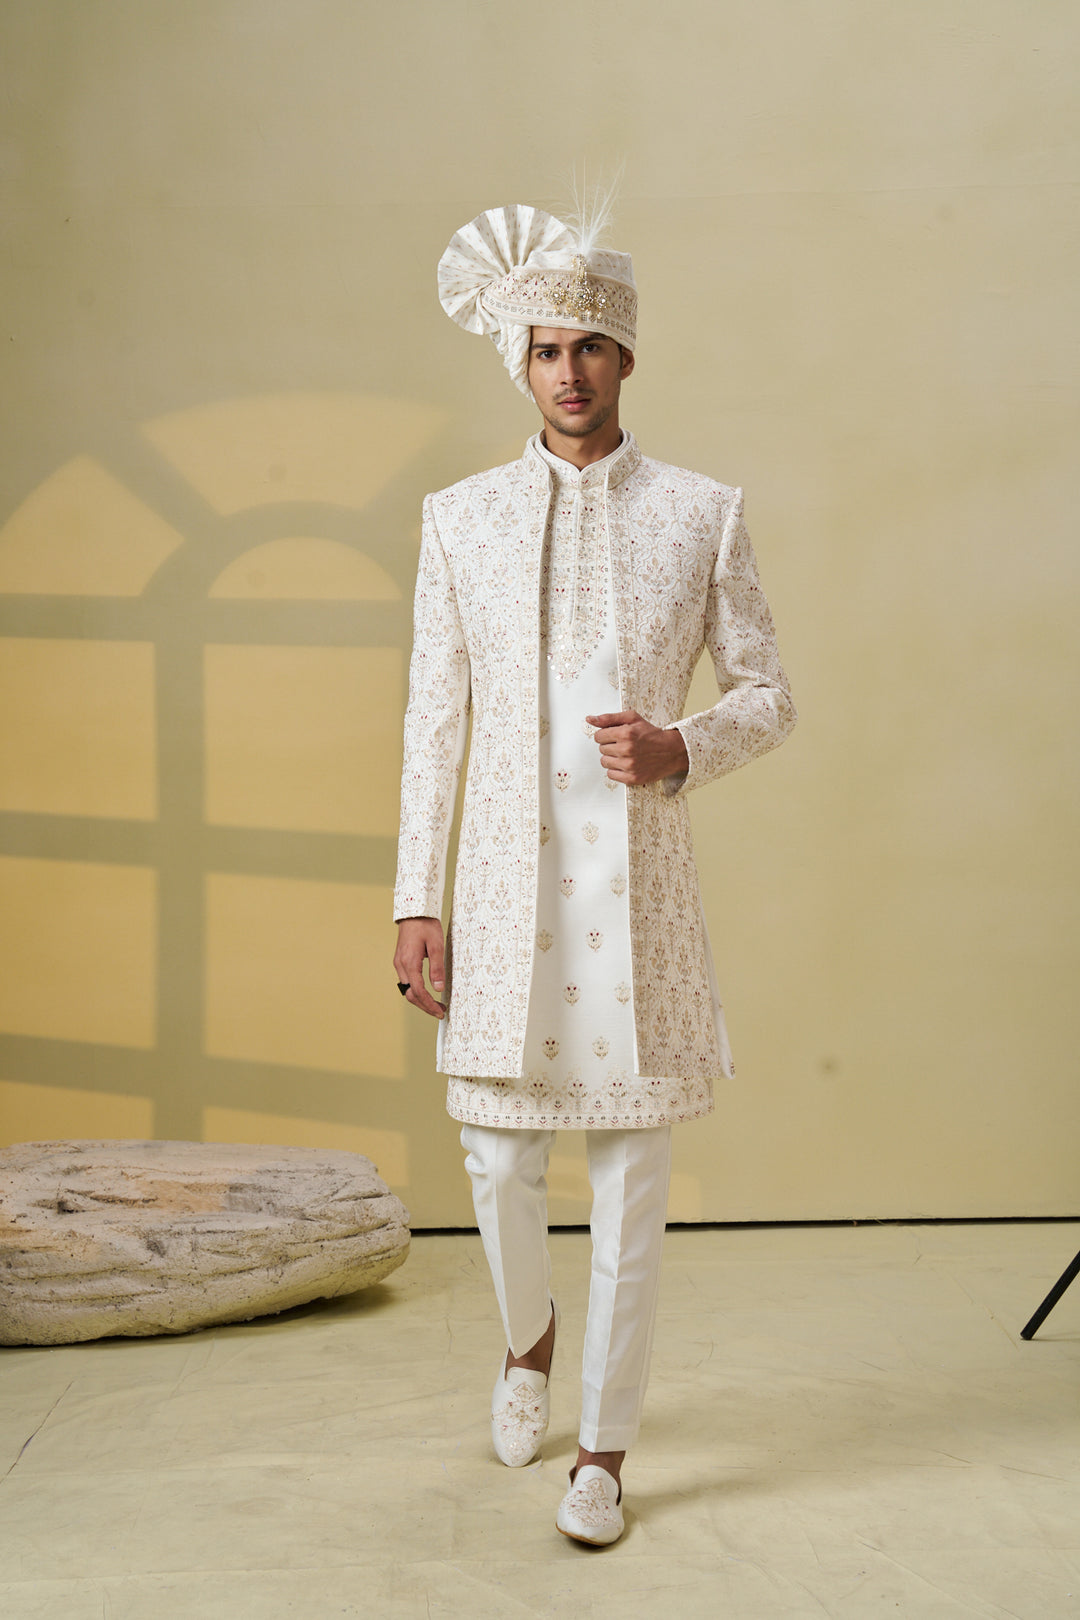 Ivory Silk men’s wedding sherwani with floral motifs (accessories included)